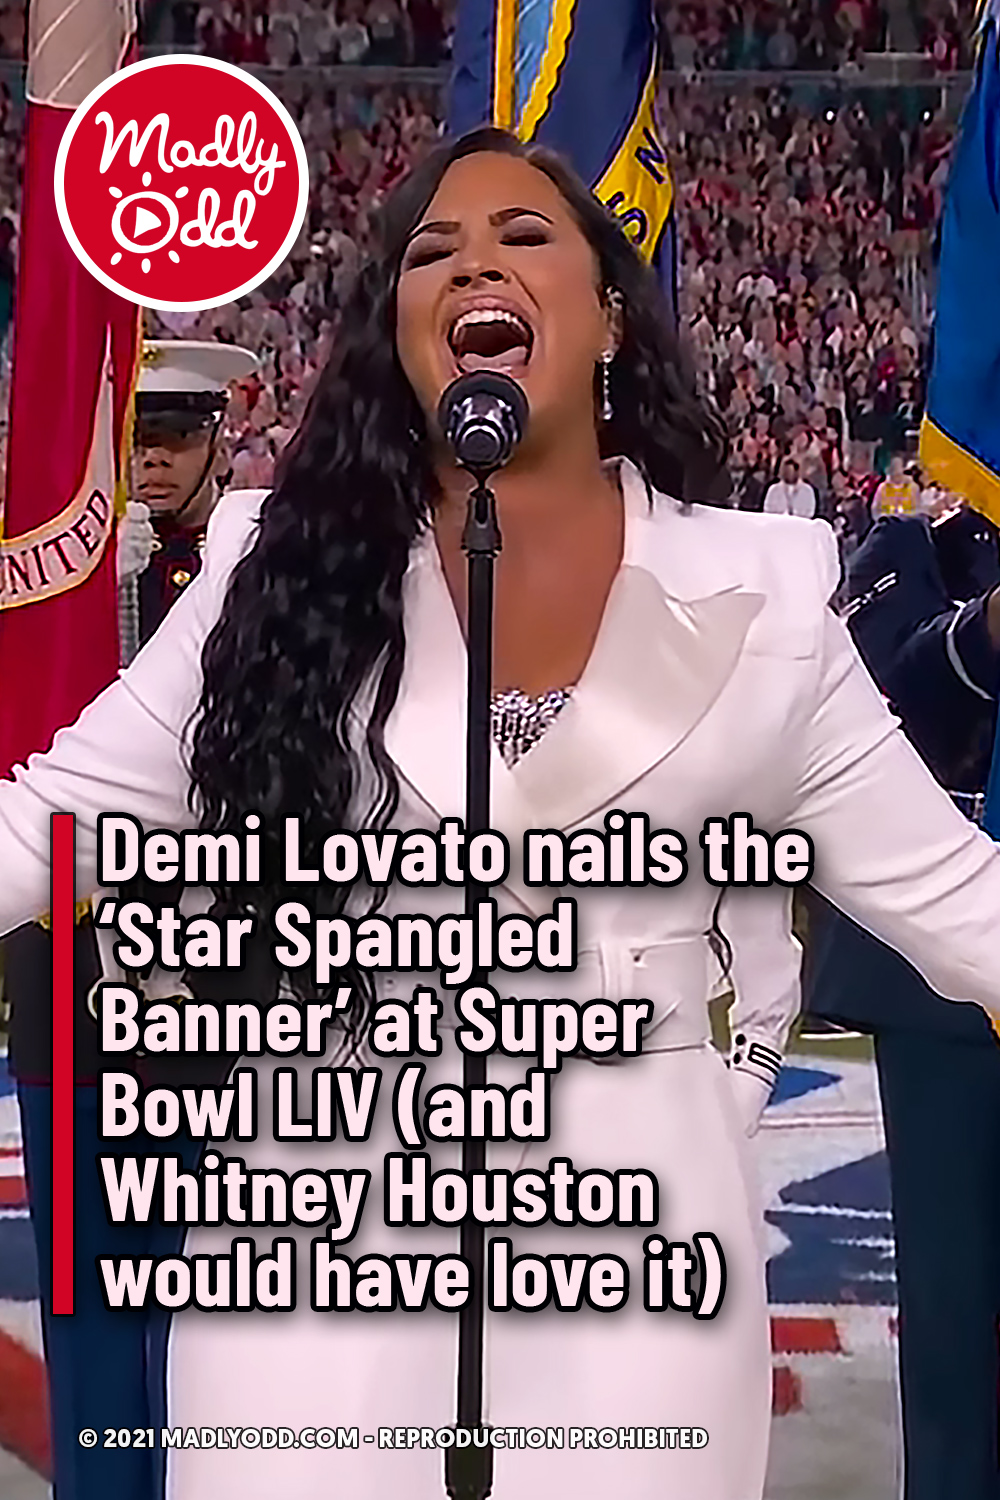 Demi Lovato nails the ‘Star Spangled Banner’ at Super Bowl LIV (and Whitney Houston would have love it)